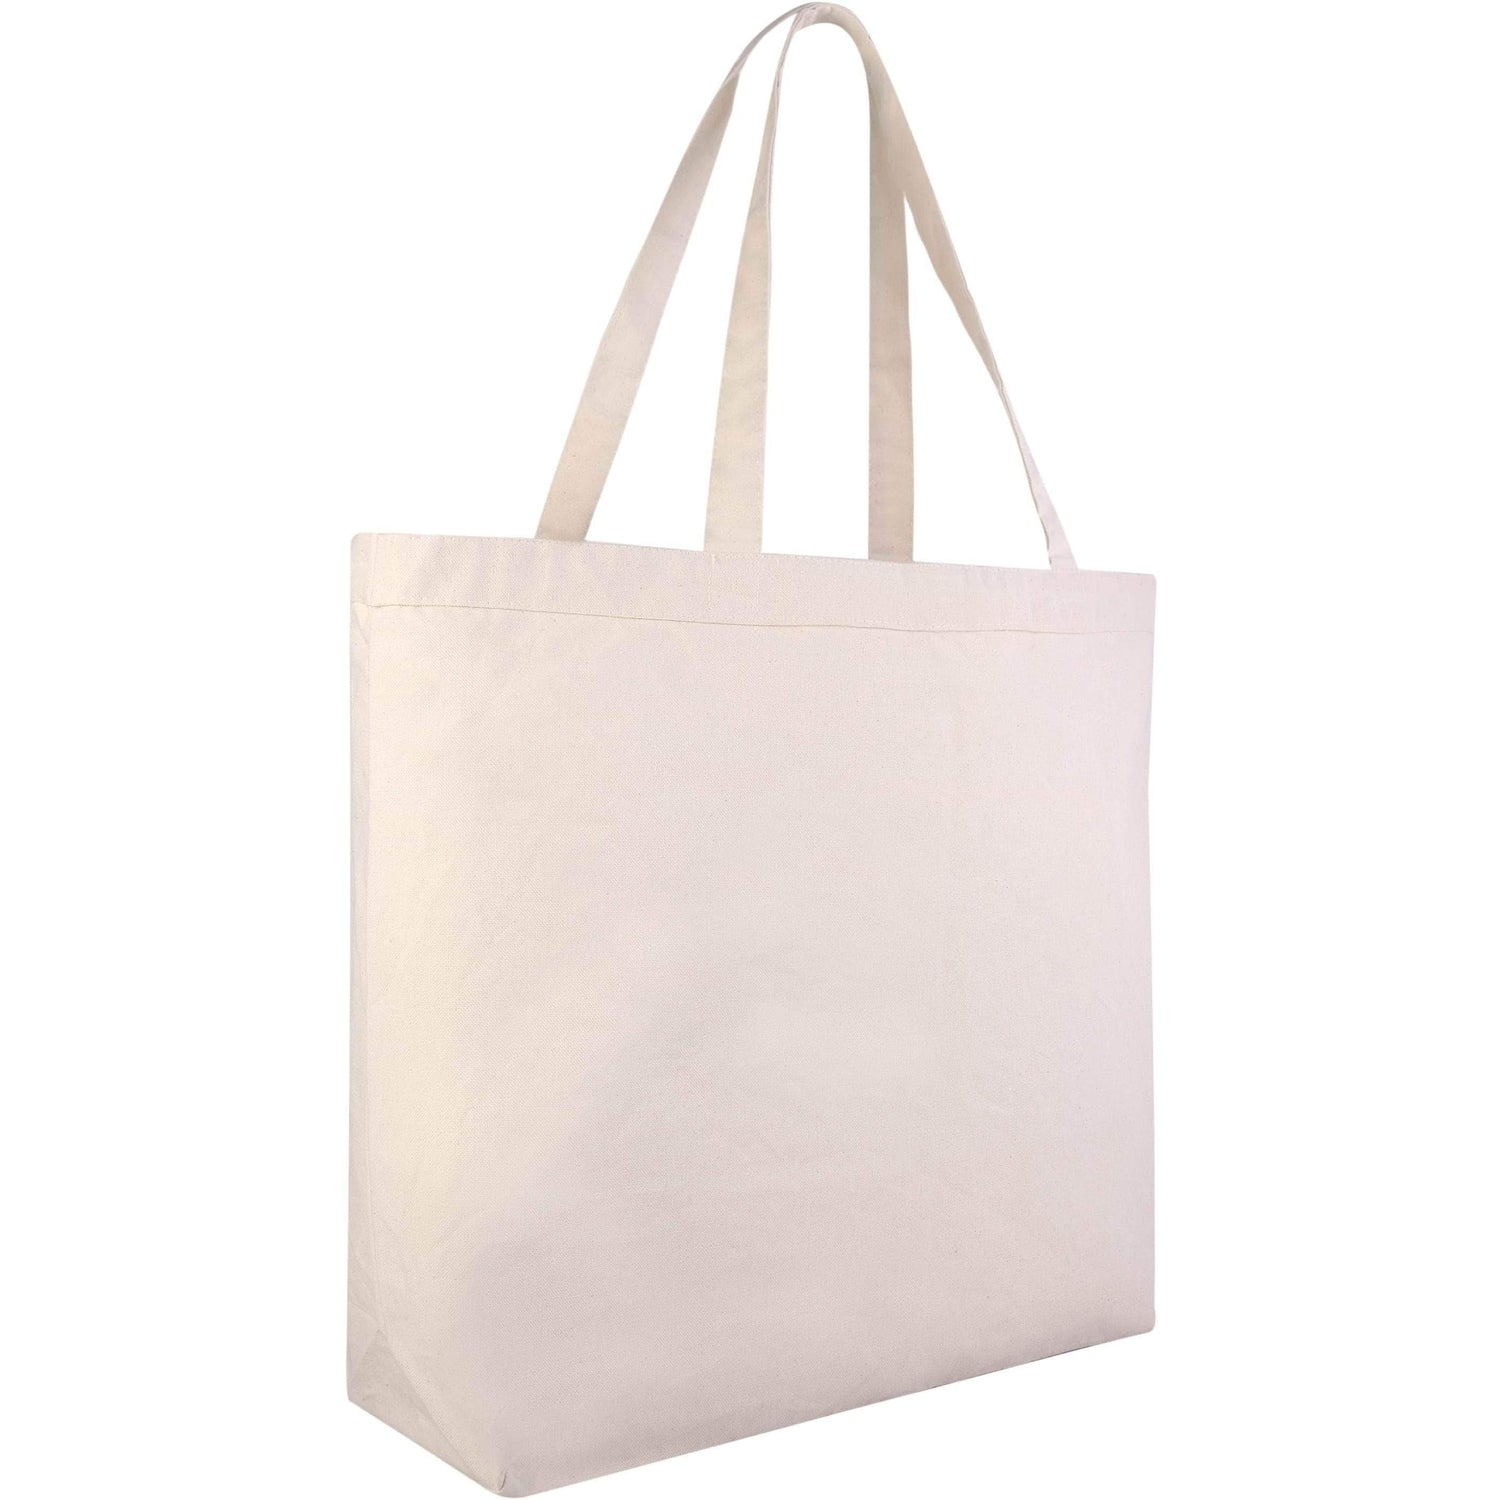 Extra Large Canvas Tote Bags Wholesale with Hook and Loop Closure